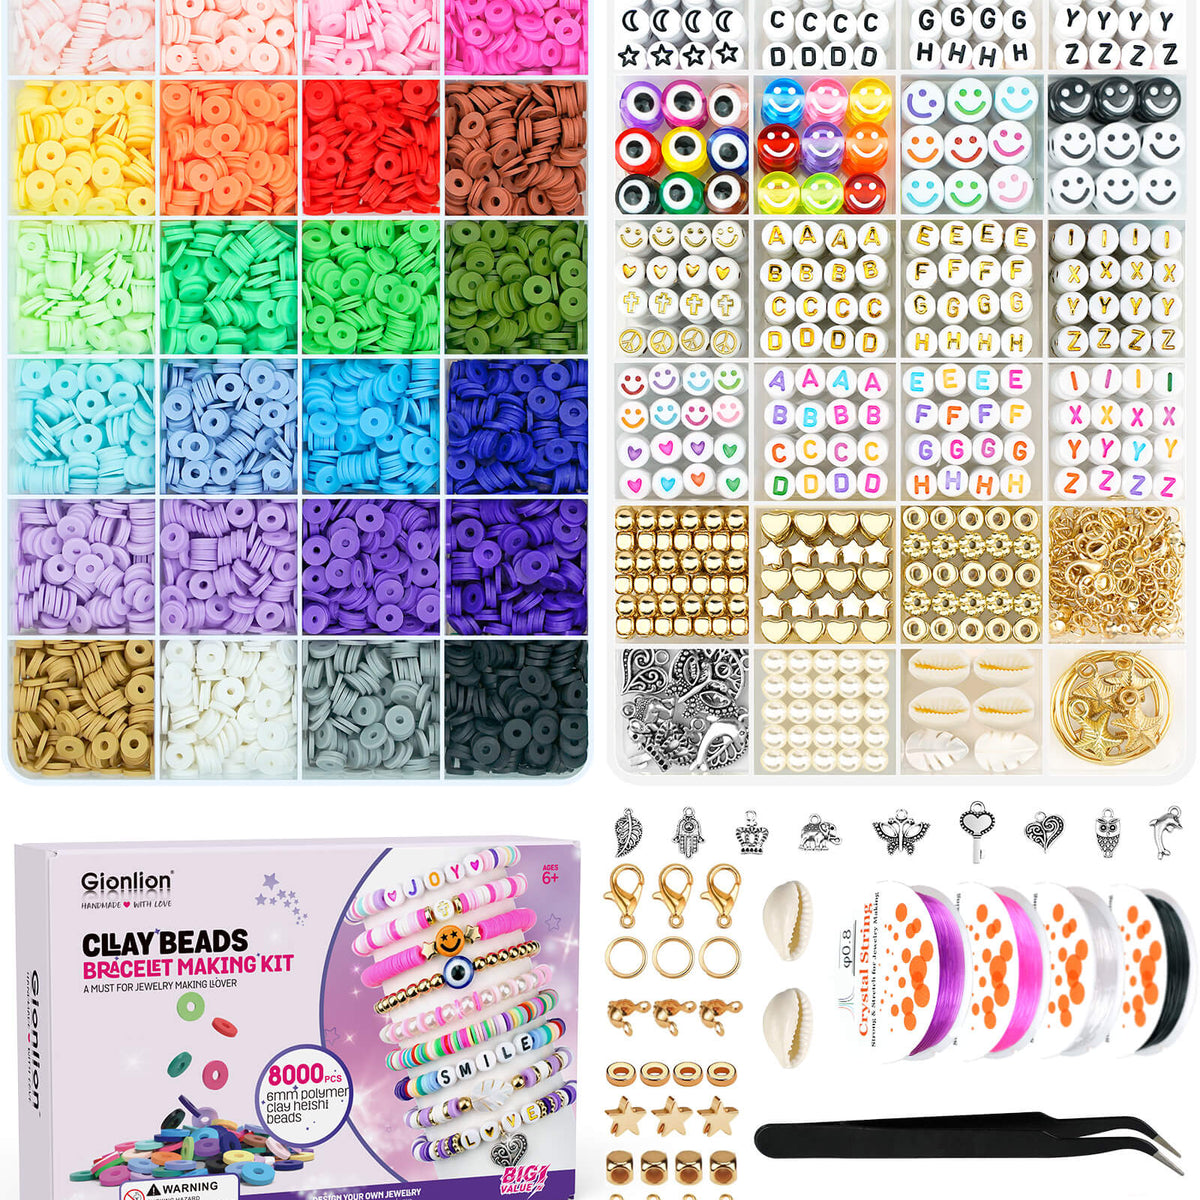 24 Grid Optional Clay Beads Bracelet Making Kit, Free to mix and match